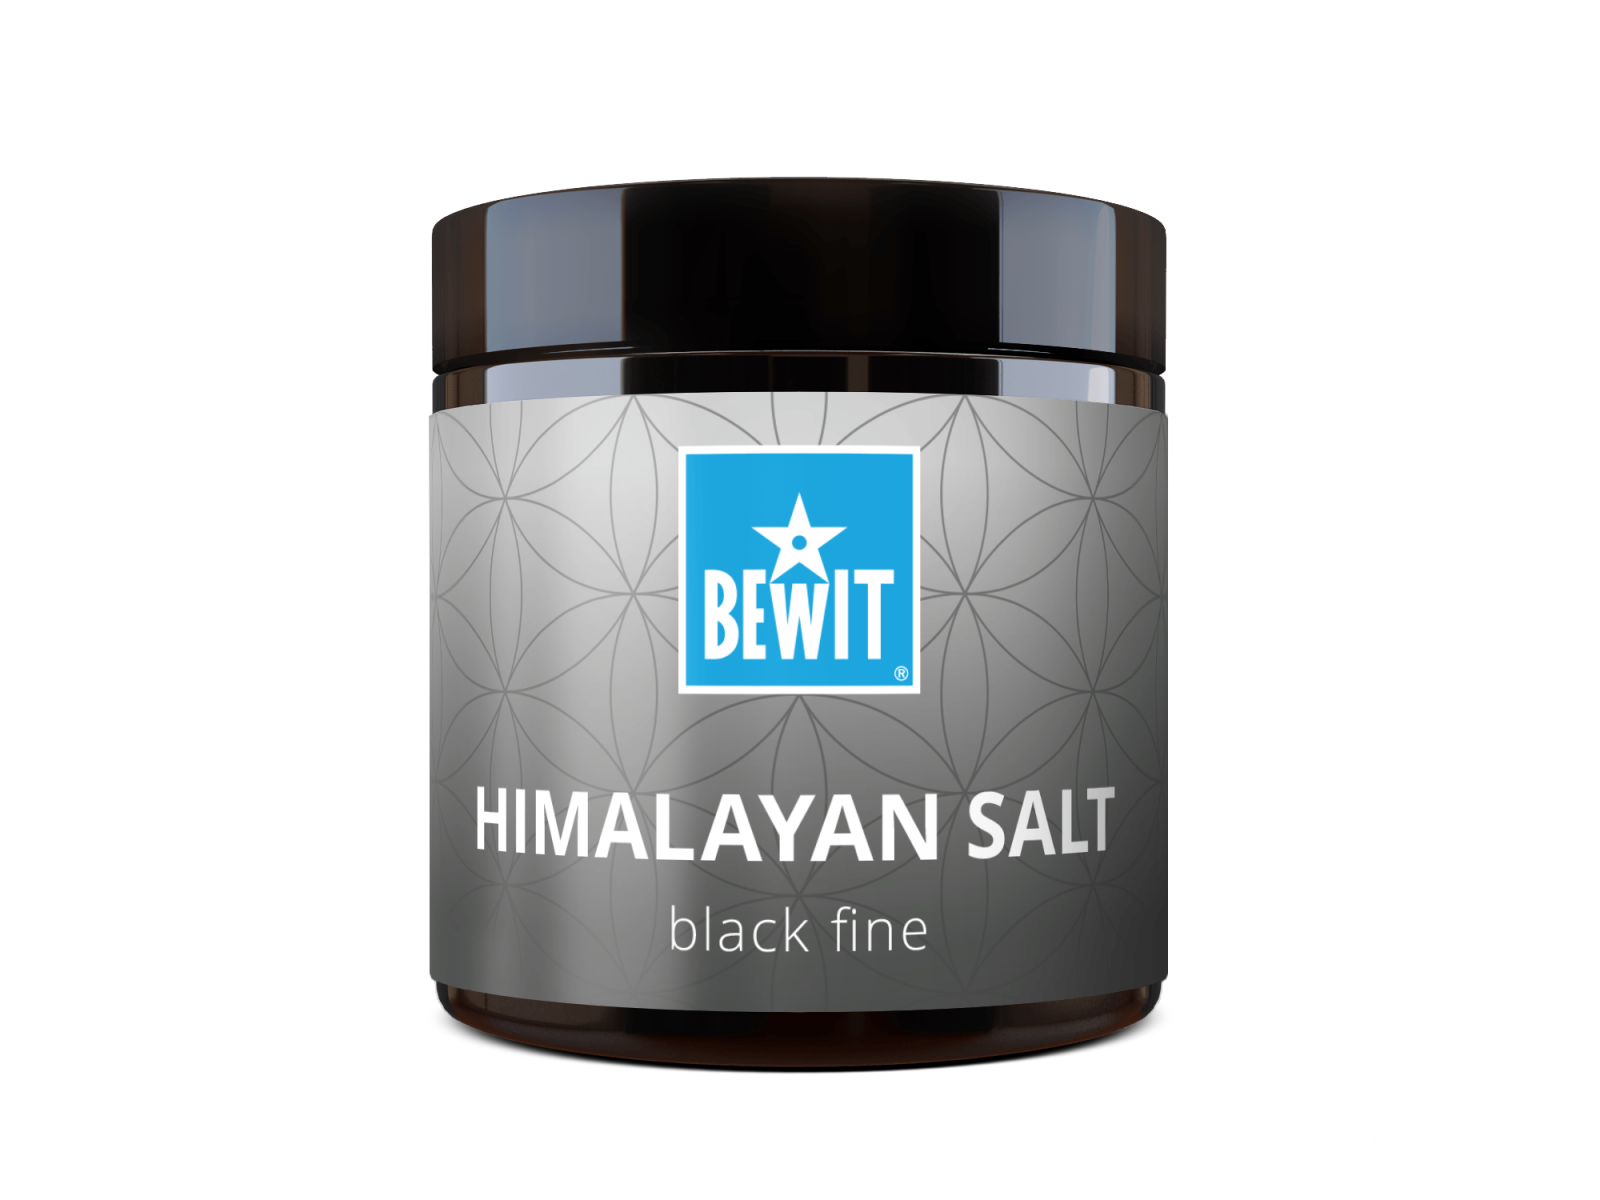 BEWIT Himalayan black salt, finely ground - A superfood